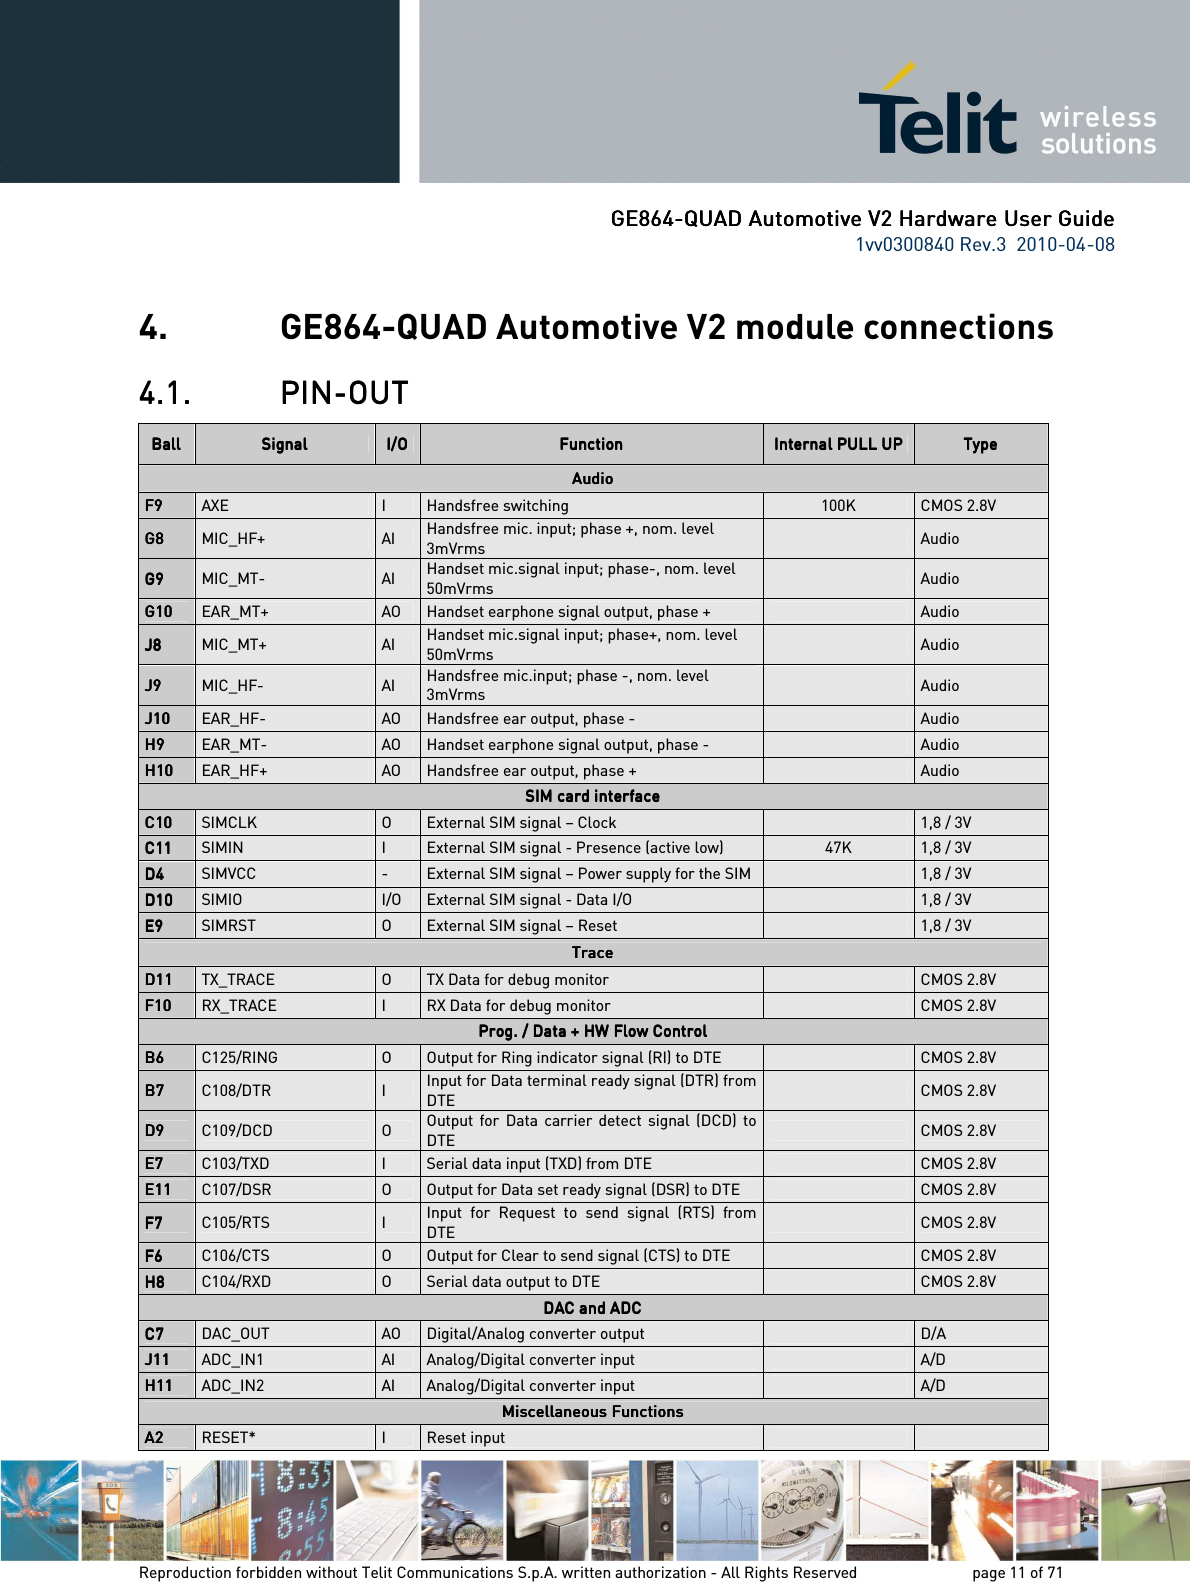      GE864GE864GE864GE864----QUAD Automotive V2 Hardware User GuideQUAD Automotive V2 Hardware User GuideQUAD Automotive V2 Hardware User GuideQUAD Automotive V2 Hardware User Guide    1vv0300840 Rev.3  2010-04-08       Reproduction forbidden without Telit Communications S.p.A. written authorization - All Rights Reserved    page 11 of 71  4. GE864-QUAD Automotive V2 module connections  4.1.4.1.4.1.4.1. PINPINPINPIN----OUTOUTOUTOUT    BallBallBallBall     SiSiSiSignalgnalgnalgnal     I/OI/OI/OI/O     FunctionFunctionFunctionFunction     Internal PULL UPInternal PULL UPInternal PULL UPInternal PULL UP    TypeTypeTypeType    AudioAudioAudioAudio    F9F9F9F9     AXE  I  Handsfree switching   100K  CMOS 2.8V G8G8G8G8     MIC_HF+  AI  Handsfree mic. input; phase +, nom. level 3mVrms     Audio G9G9G9G9     MIC_MT-  AI  Handset mic.signal input; phase-, nom. level 50mVrms     Audio G10G10G10G10     EAR_MT+  AO  Handset earphone signal output, phase +     Audio J8J8J8J8     MIC_MT+  AI  Handset mic.signal input; phase+, nom. level 50mVrms     Audio J9J9J9J9     MIC_HF-  AI  Handsfree mic.input; phase -, nom. level 3mVrms     Audio J10J10J10J10     EAR_HF-  AO  Handsfree ear output, phase -     Audio H9H9H9H9     EAR_MT-  AO  Handset earphone signal output, phase -     Audio H10H10H10H10     EAR_HF+  AO  Handsfree ear output, phase +     Audio SIM card interfaceSIM card interfaceSIM card interfaceSIM card interface    C10C10C10C10     SIMCLK  O  External SIM signal – Clock     1,8 / 3V C11C11C11C11     SIMIN  I  External SIM signal - Presence (active low)  47K  1,8 / 3V DDDD4444     SIMVCC  -  External SIM signal – Power supply for the SIM     1,8 / 3V D10D10D10D10     SIMIO  I/O  External SIM signal - Data I/O     1,8 / 3V E9E9E9E9     SIMRST  O  External SIM signal – Reset     1,8 / 3V TraceTraceTraceTrace    D11D11D11D11     TX_TRACE  O  TX Data for debug monitor      CMOS 2.8V F10F10F10F10     RX_TRACE  I  RX Data for debug monitor      CMOS 2.8V Prog. / Data + HW Flow ControlProg. / Data + HW Flow ControlProg. / Data + HW Flow ControlProg. / Data + HW Flow Control    B6B6B6B6     C125/RING  O  Output for Ring indicator signal (RI) to DTE      CMOS 2.8V B7B7B7B7     C108/DTR  I  Input for Data terminal ready signal (DTR) from DTE       CMOS 2.8V D9D9D9D9     C109/DCD  O  Output  for  Data  carrier  detect  signal  (DCD) to DTE      CMOS 2.8V E7E7E7E7     C103/TXD  I  Serial data input (TXD) from DTE      CMOS 2.8V E11E11E11E11     C107/DSR  O  Output for Data set ready signal (DSR) to DTE     CMOS 2.8V F7F7F7F7     C105/RTS  I  Input  for  Request  to  send  signal  (RTS)  from DTE      CMOS 2.8V F6F6F6F6     C106/CTS  O  Output for Clear to send signal (CTS) to DTE      CMOS 2.8V H8H8H8H8     C104/RXD  O  Serial data output to DTE      CMOS 2.8V DAC and ADCDAC and ADCDAC and ADCDAC and ADC C7C7C7C7     DAC_OUT  AO  Digital/Analog converter output     D/A J11J11J11J11     ADC_IN1  AI  Analog/Digital converter input     A/D H11H11H11H11     ADC_IN2  AI  Analog/Digital converter input     A/D Miscellaneous FunctionsMiscellaneous FunctionsMiscellaneous FunctionsMiscellaneous Functions    A2A2A2A2     RESET*  I  Reset input       